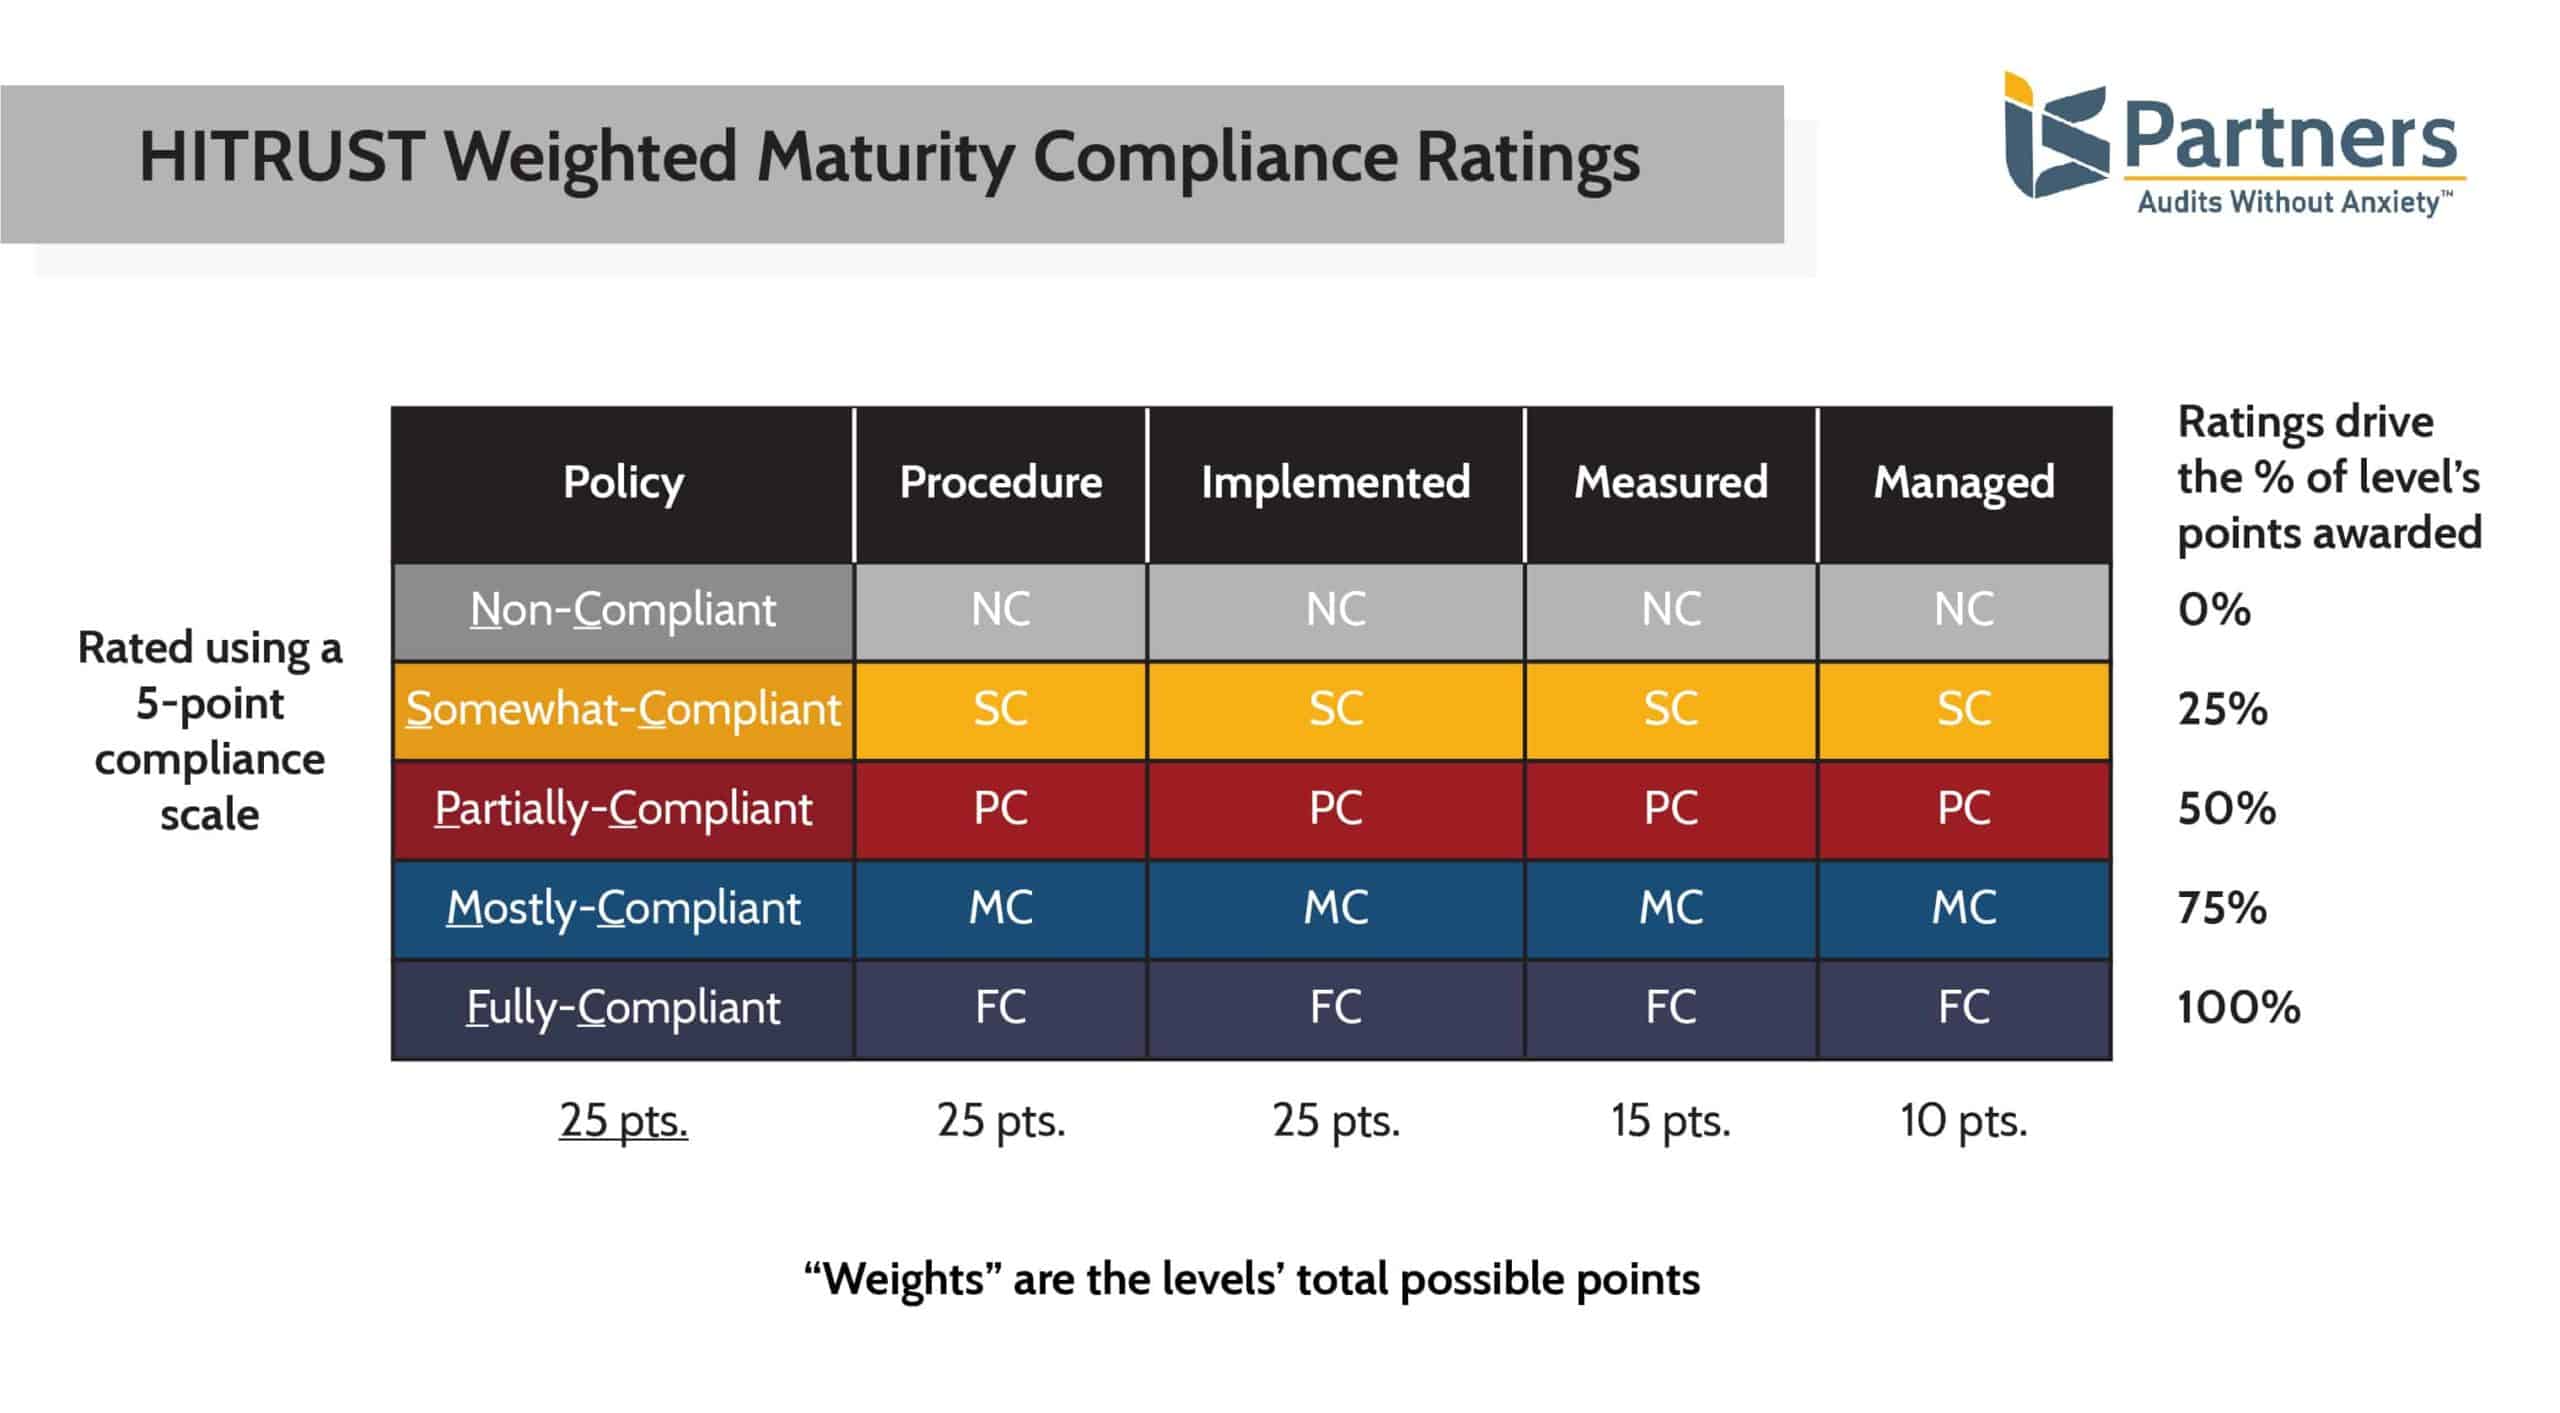 table showing the current HITRUST Weighted Maturity Compliance Ratings